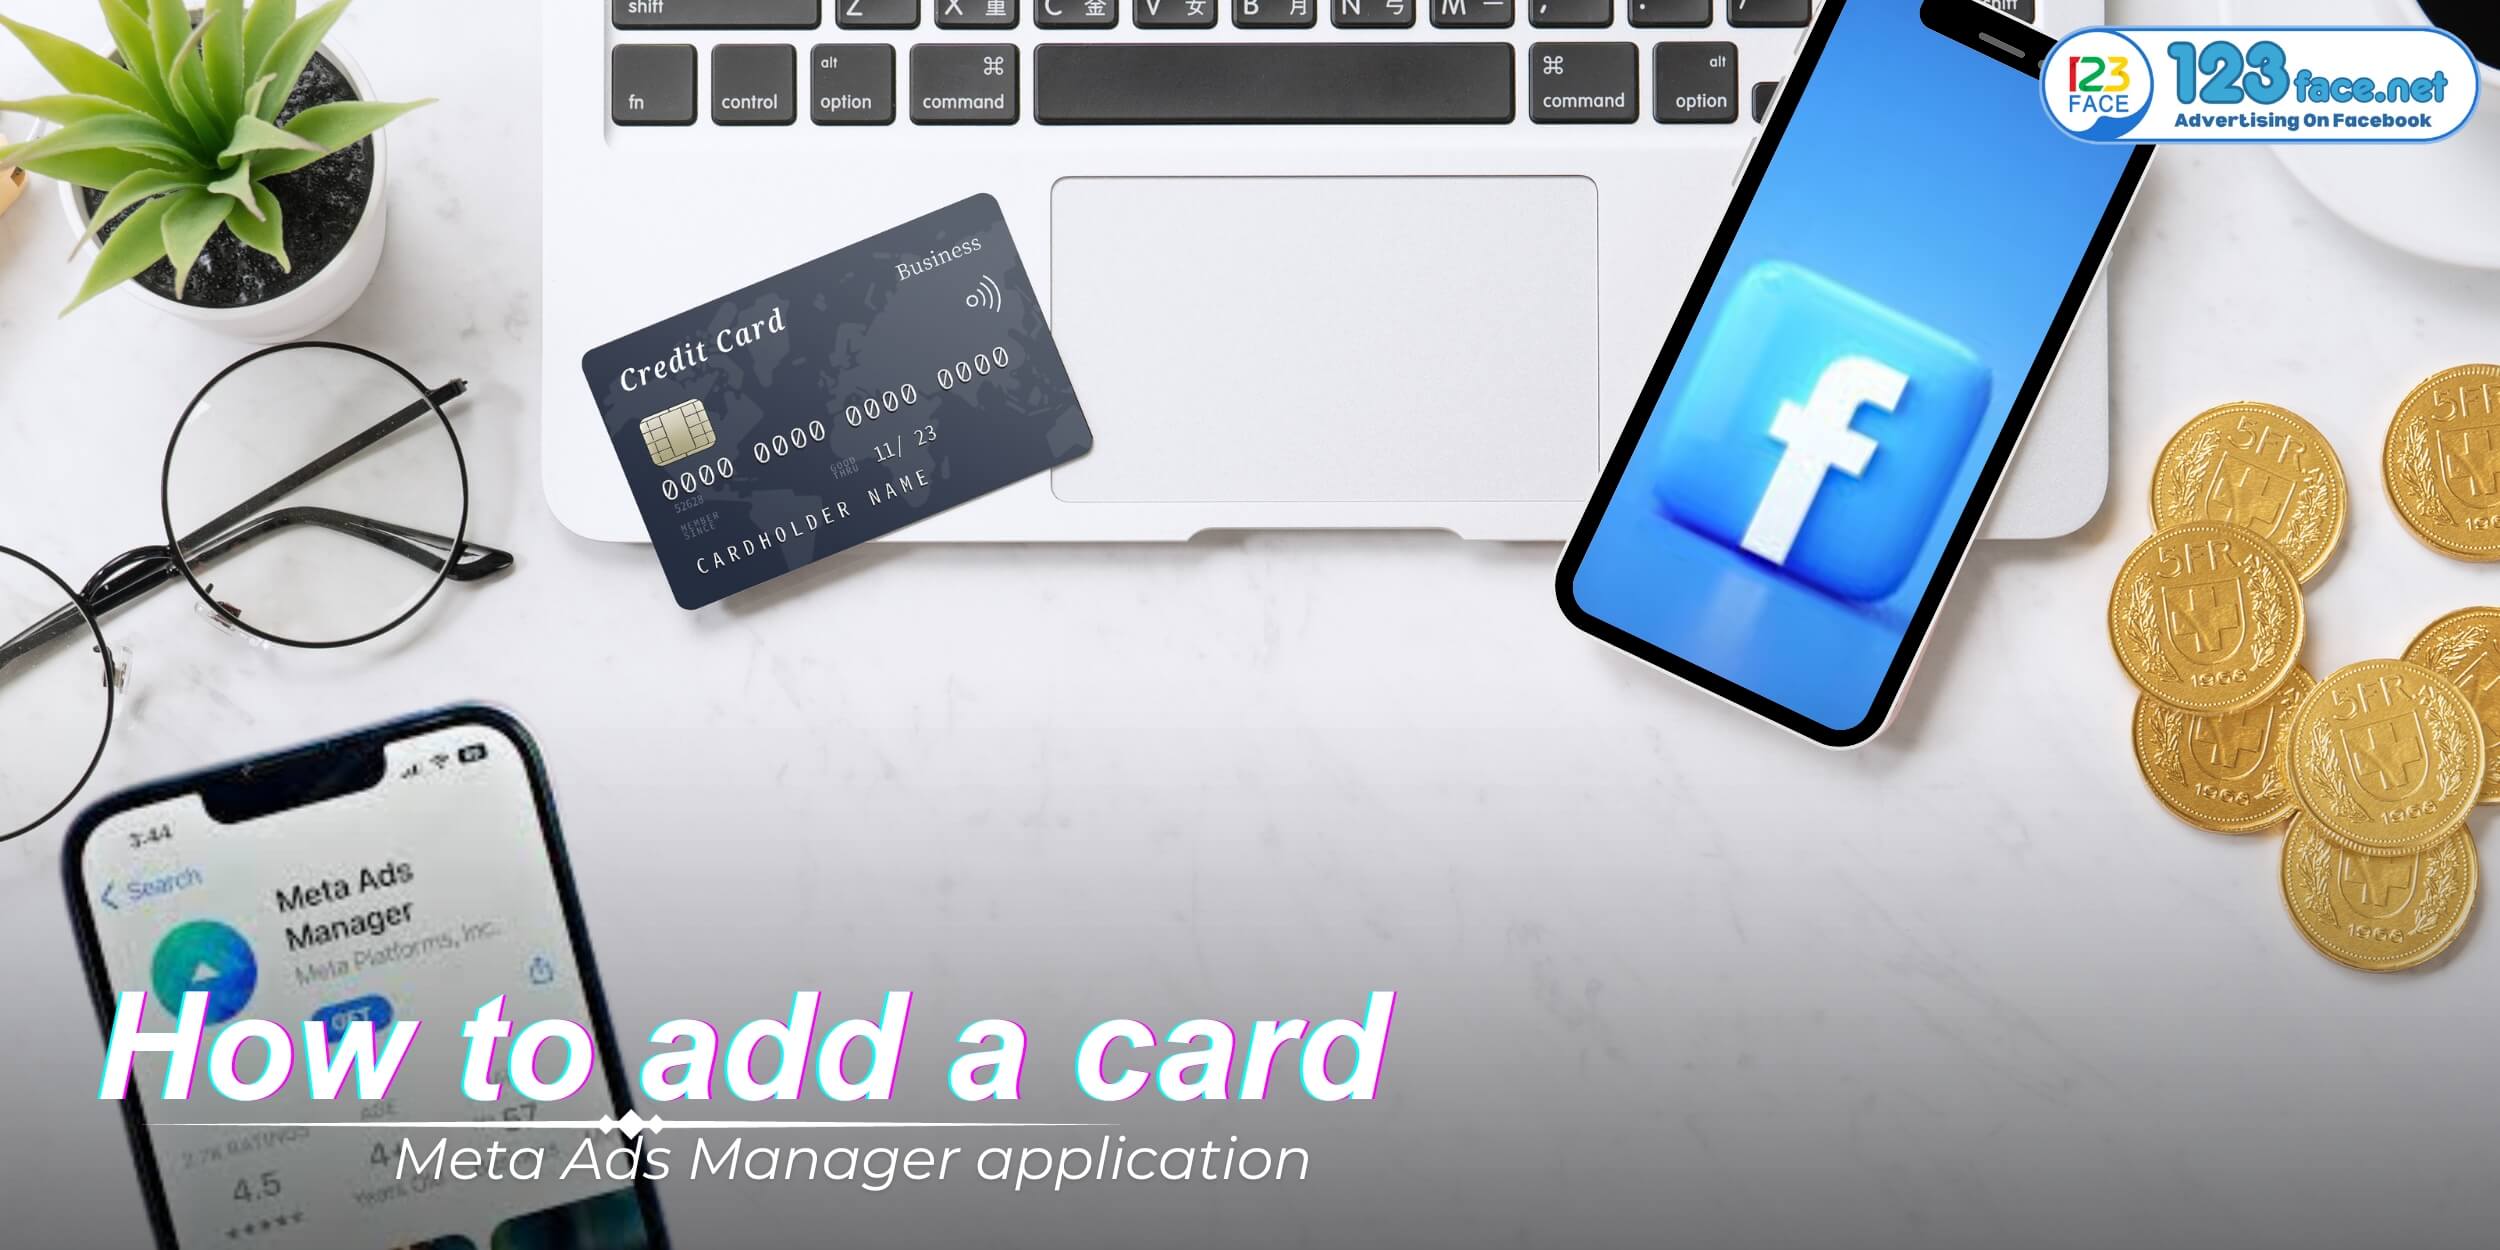 Method of adding cards with Meta Ads Manager application (success rate of adding cards increases)